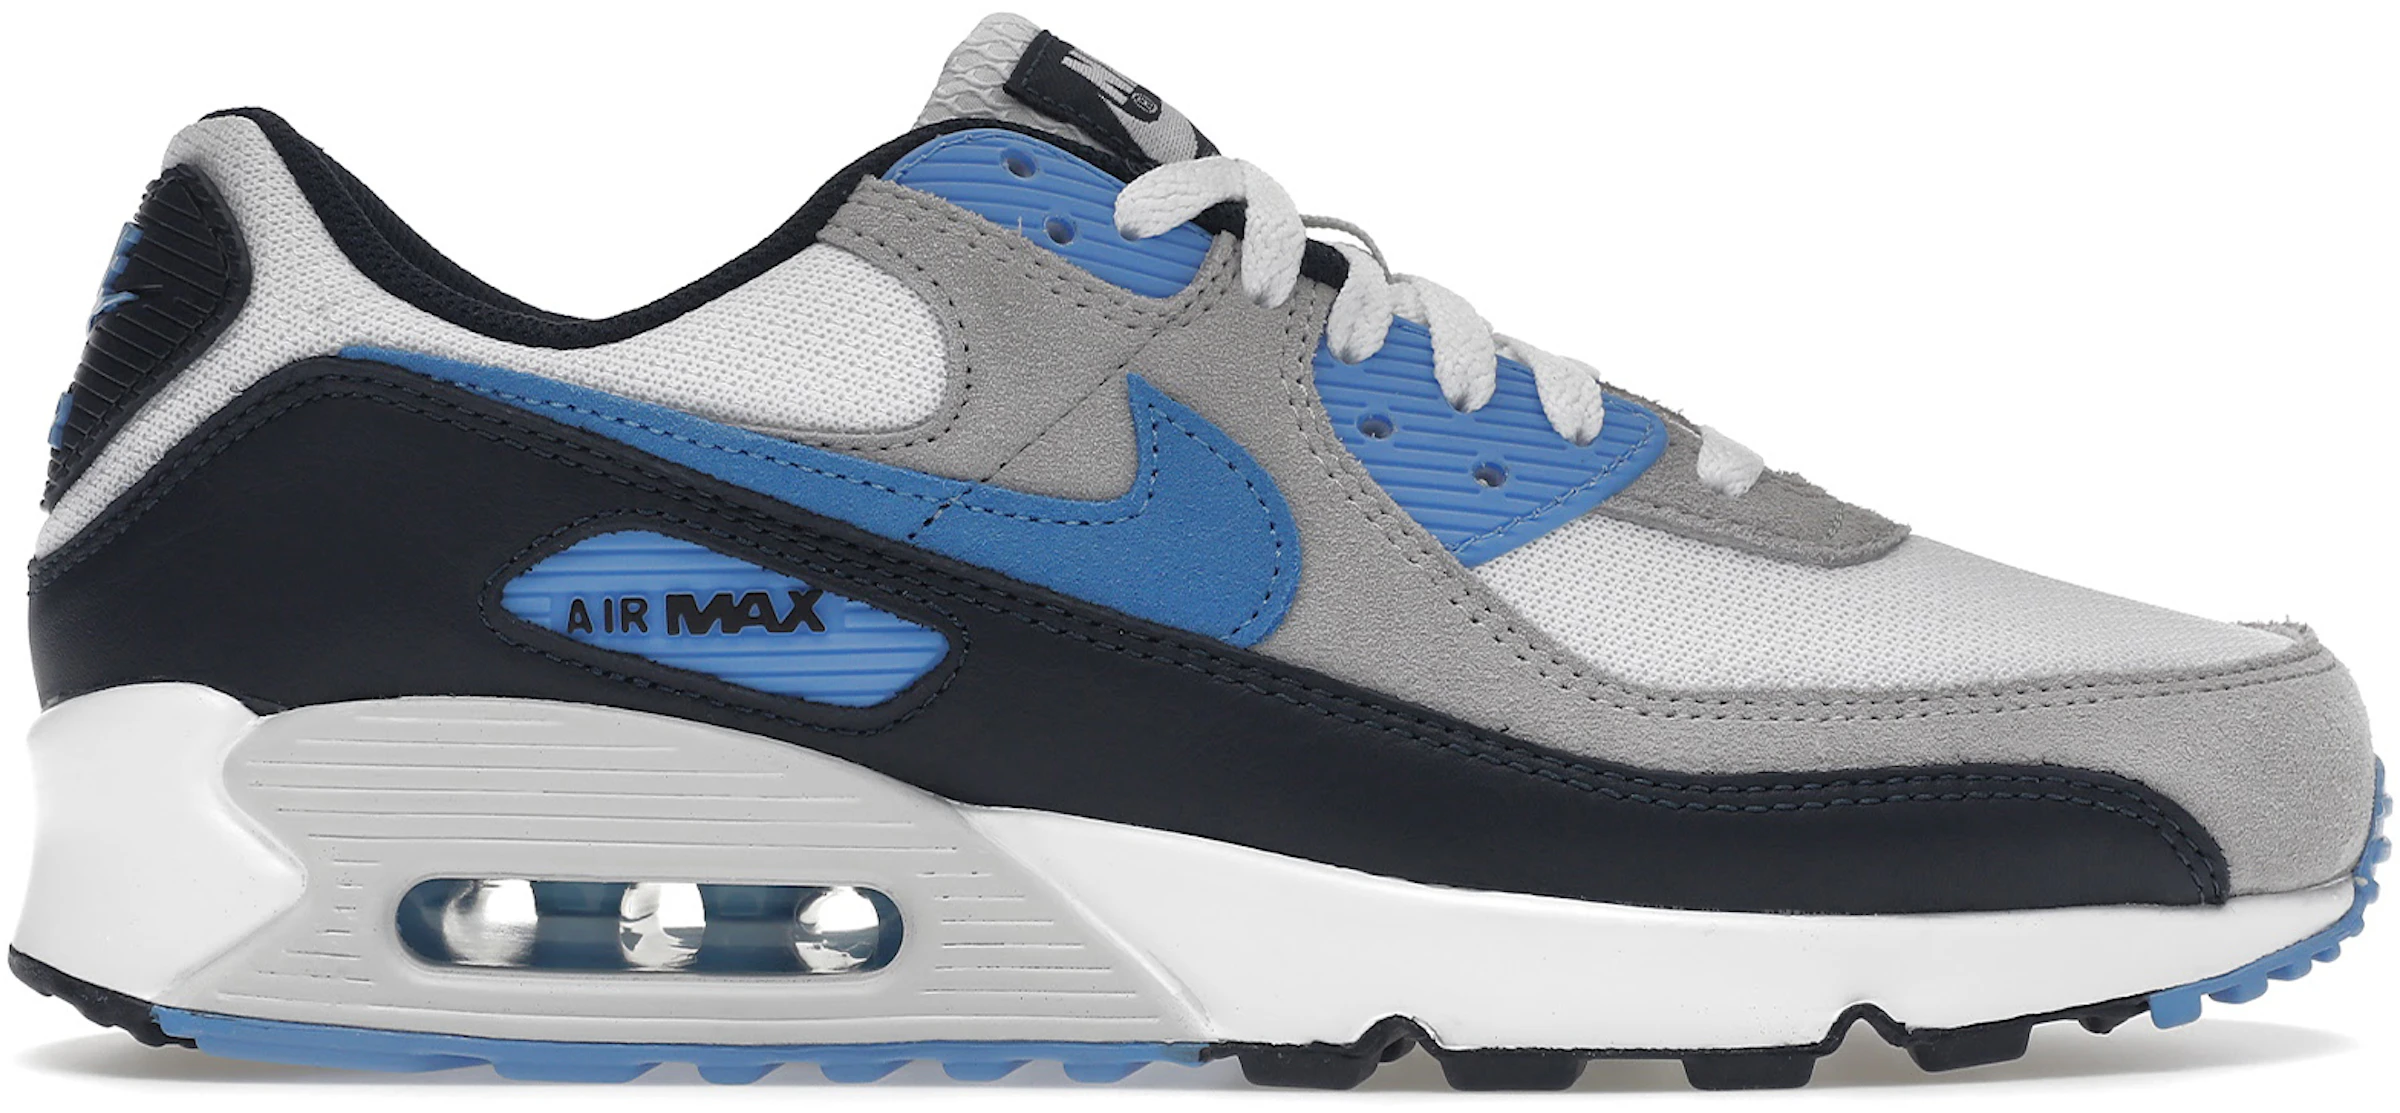 Buy Nike Air Max 90 Size 10 Shoes & New Sneakers -